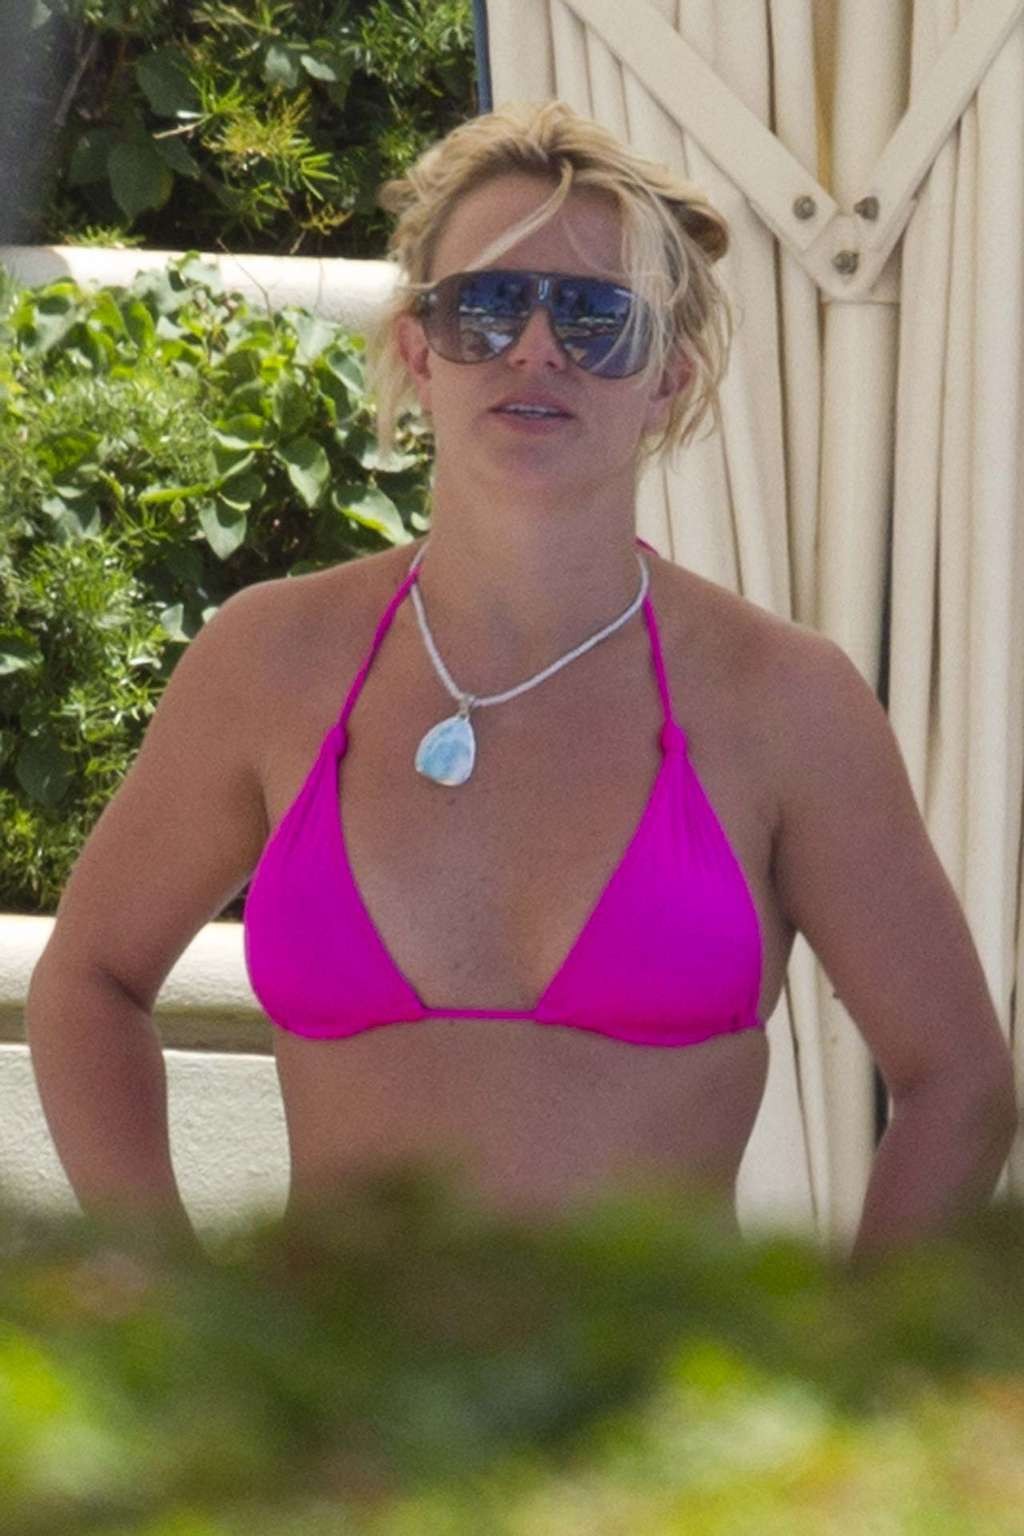 Britney Spears revelas great body and nice ass in pink bikini paparazzi shoots #75335131